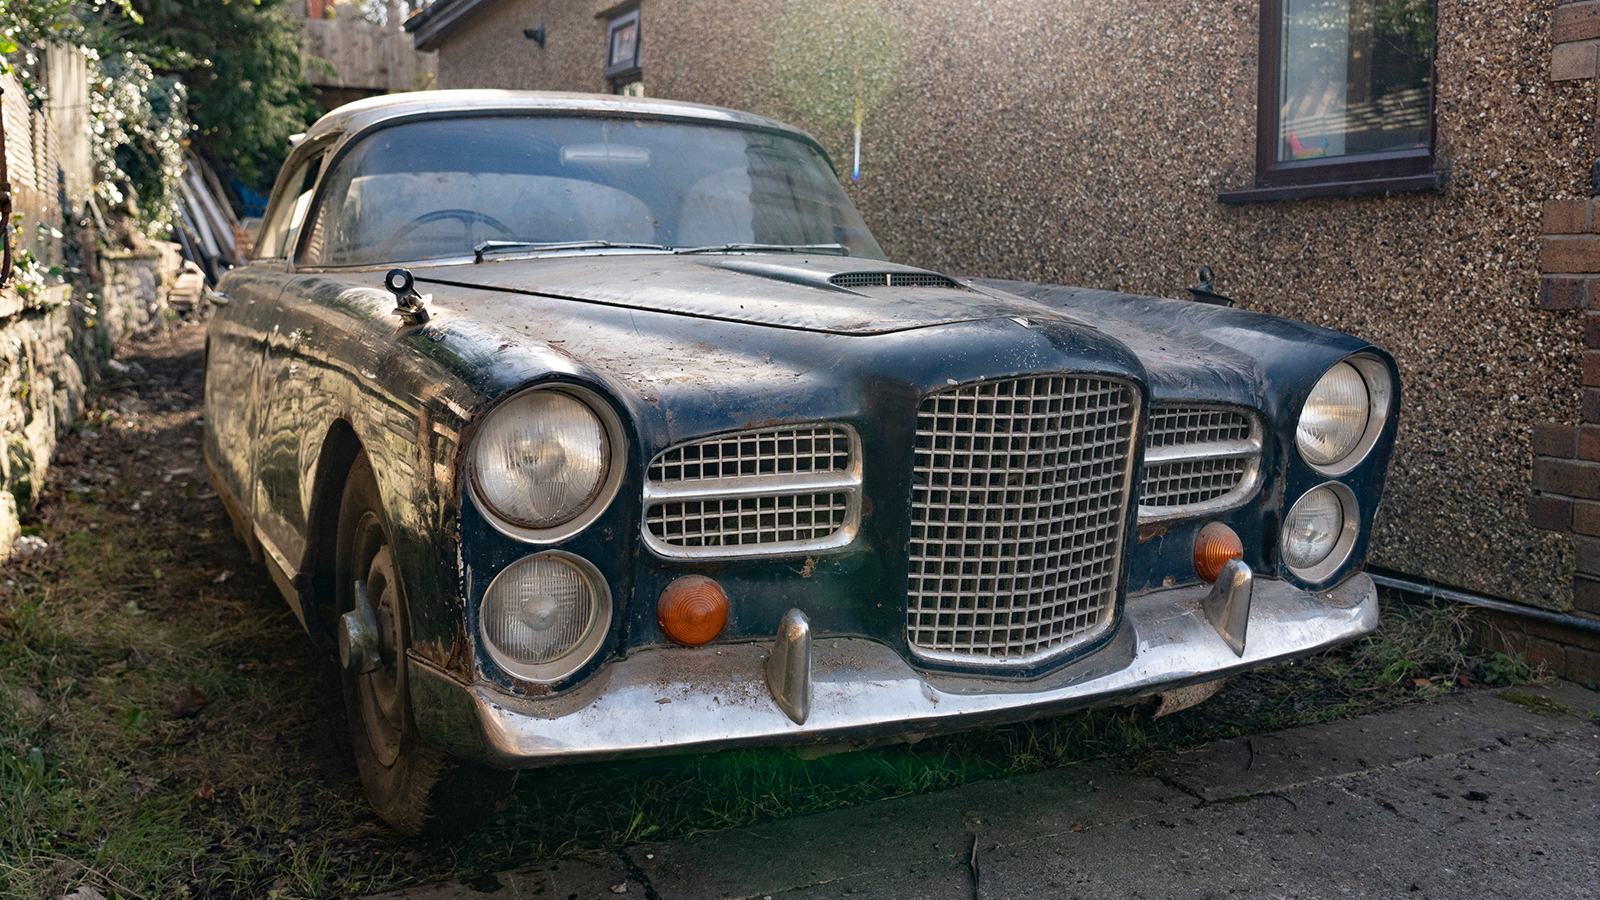 This barn-stored Facel Vega could be a tempting project